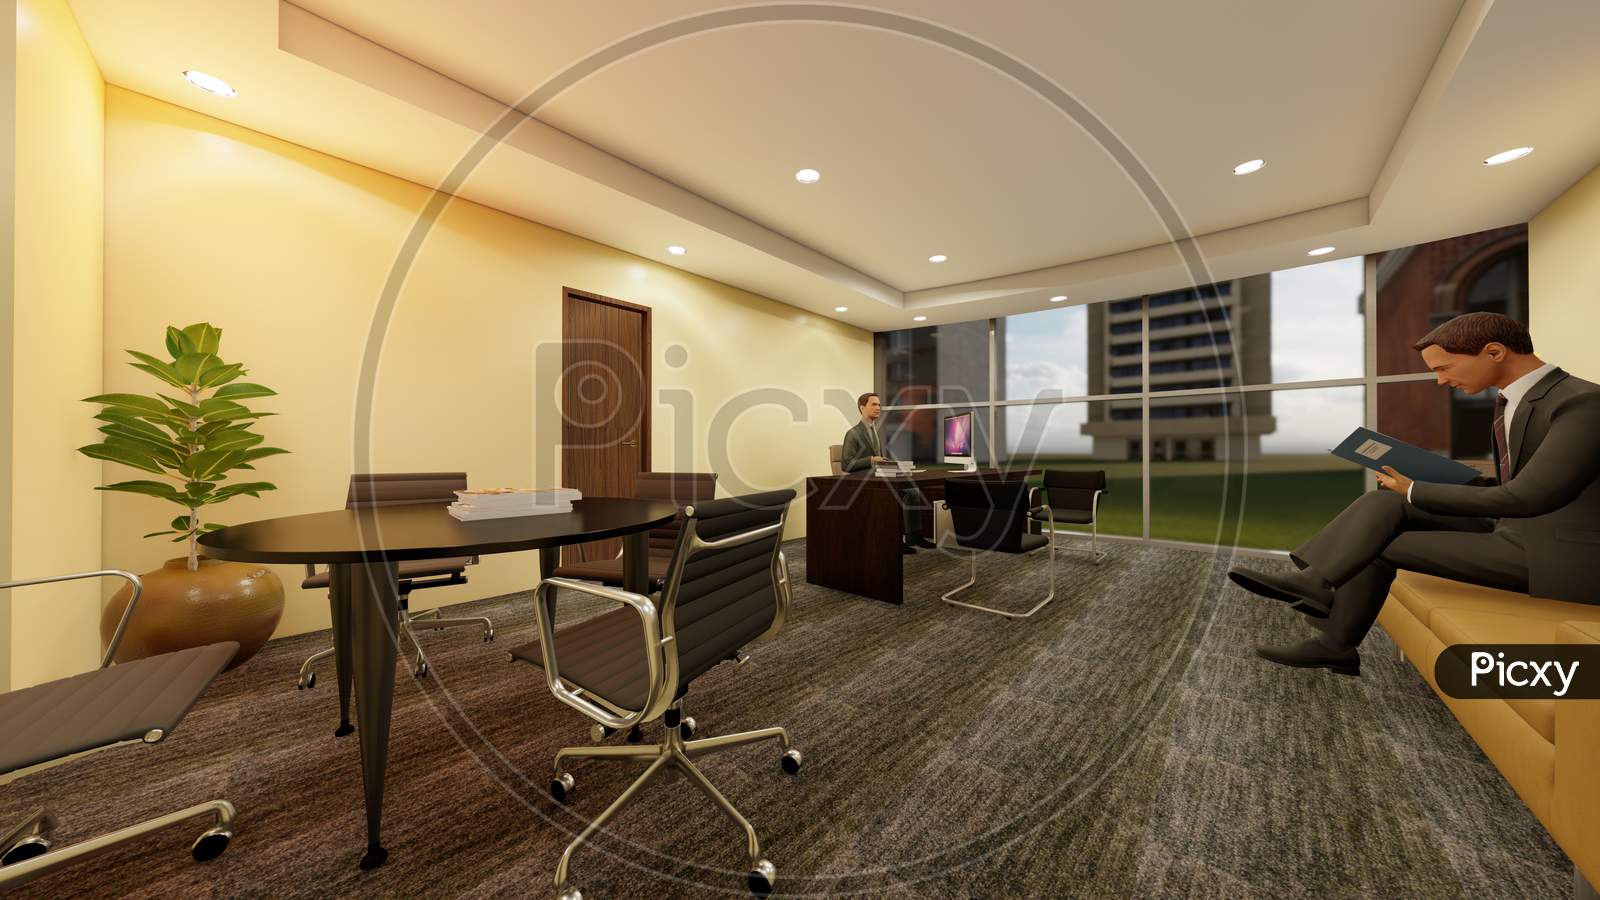 Three Dimensional Drawing Of Office Of An Chief Executive Officer Who Meeting With Another Staff